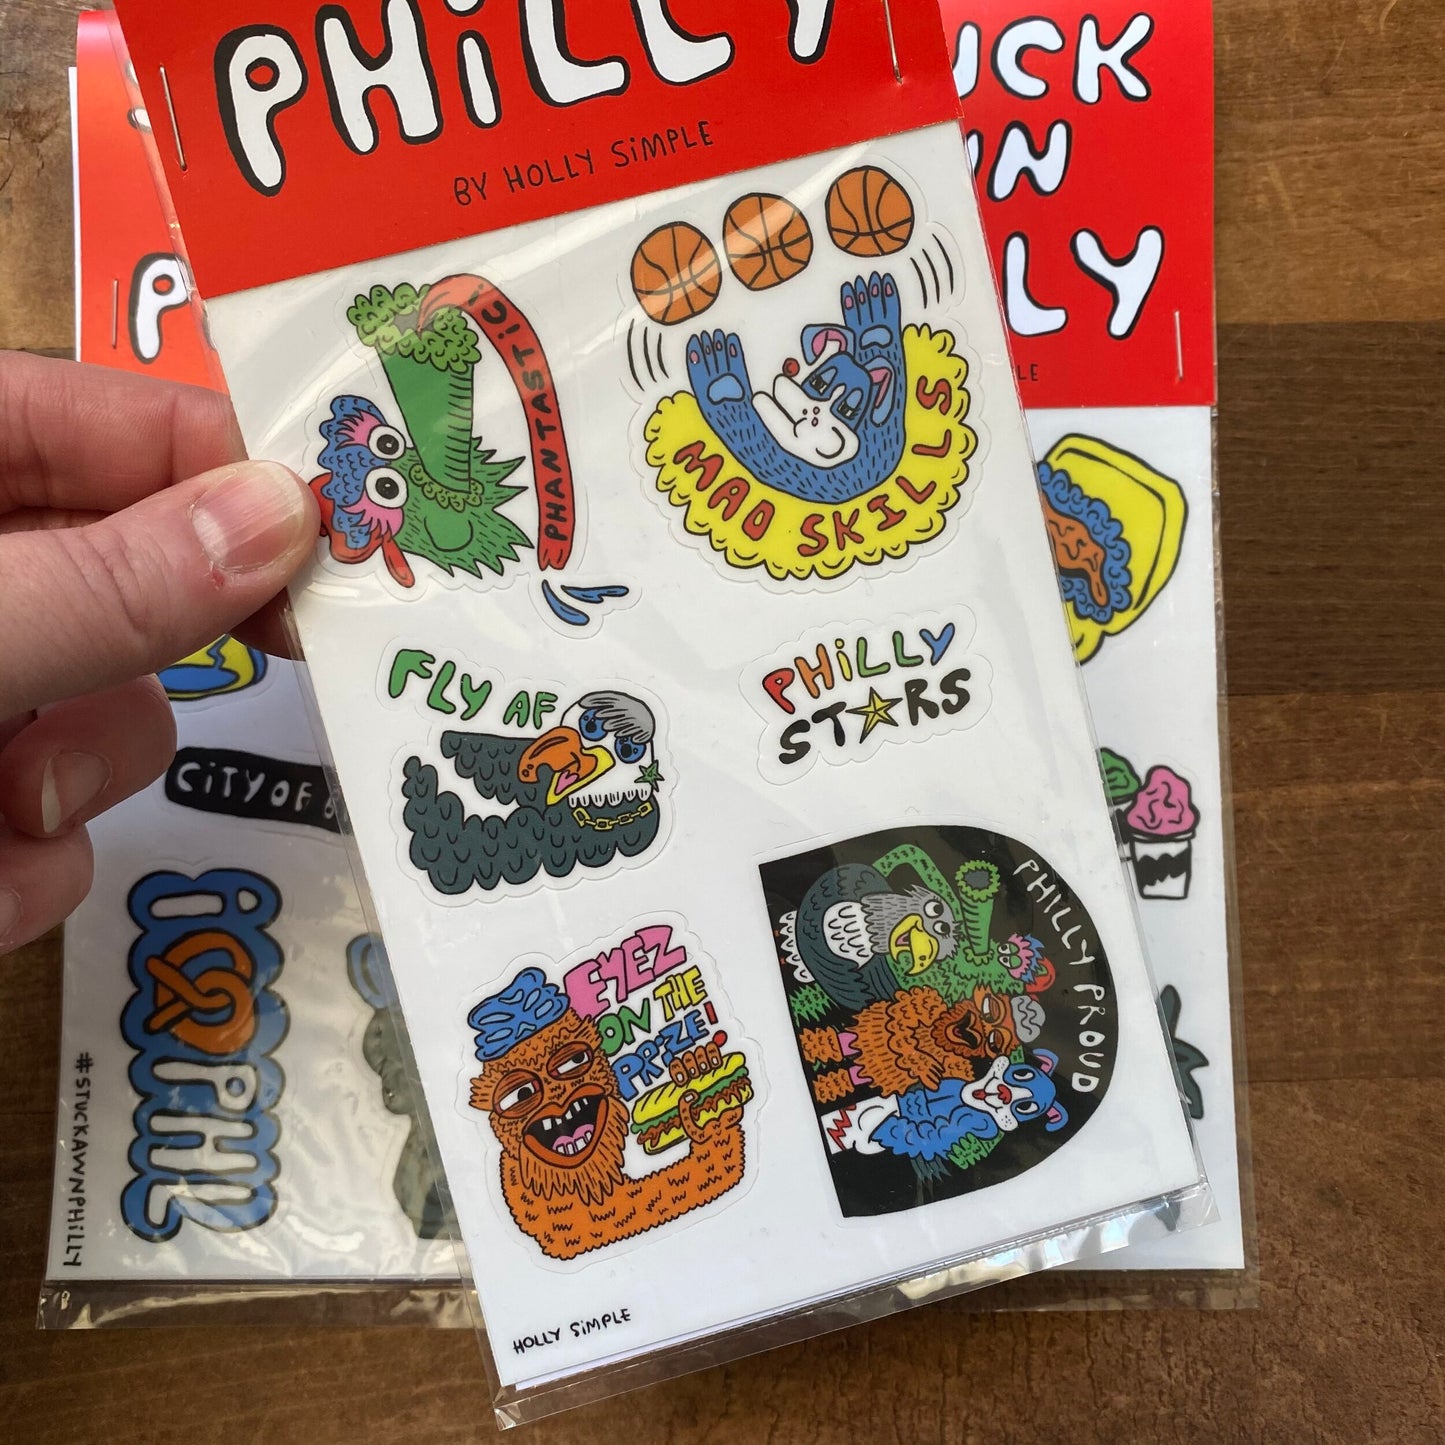 A person holding a package of Holly Simple Philly Sticker Packs featuring iconic symbols, sports references, and Rocky.